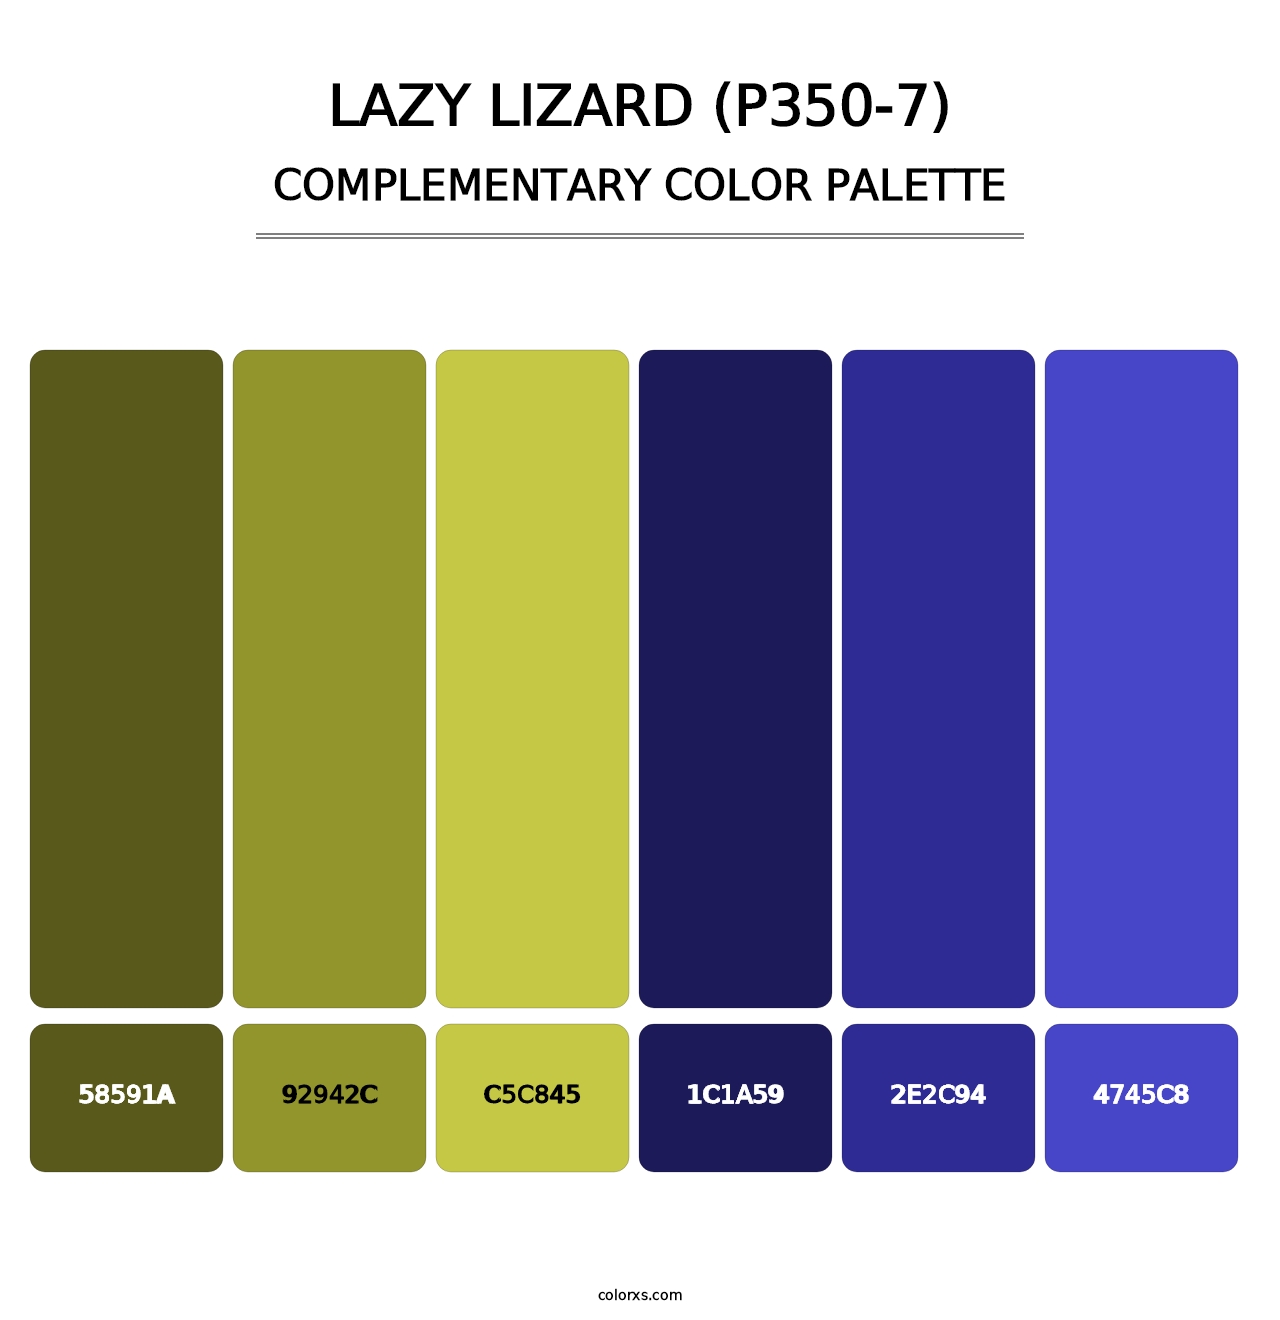 Lazy Lizard (P350-7) - Complementary Color Palette